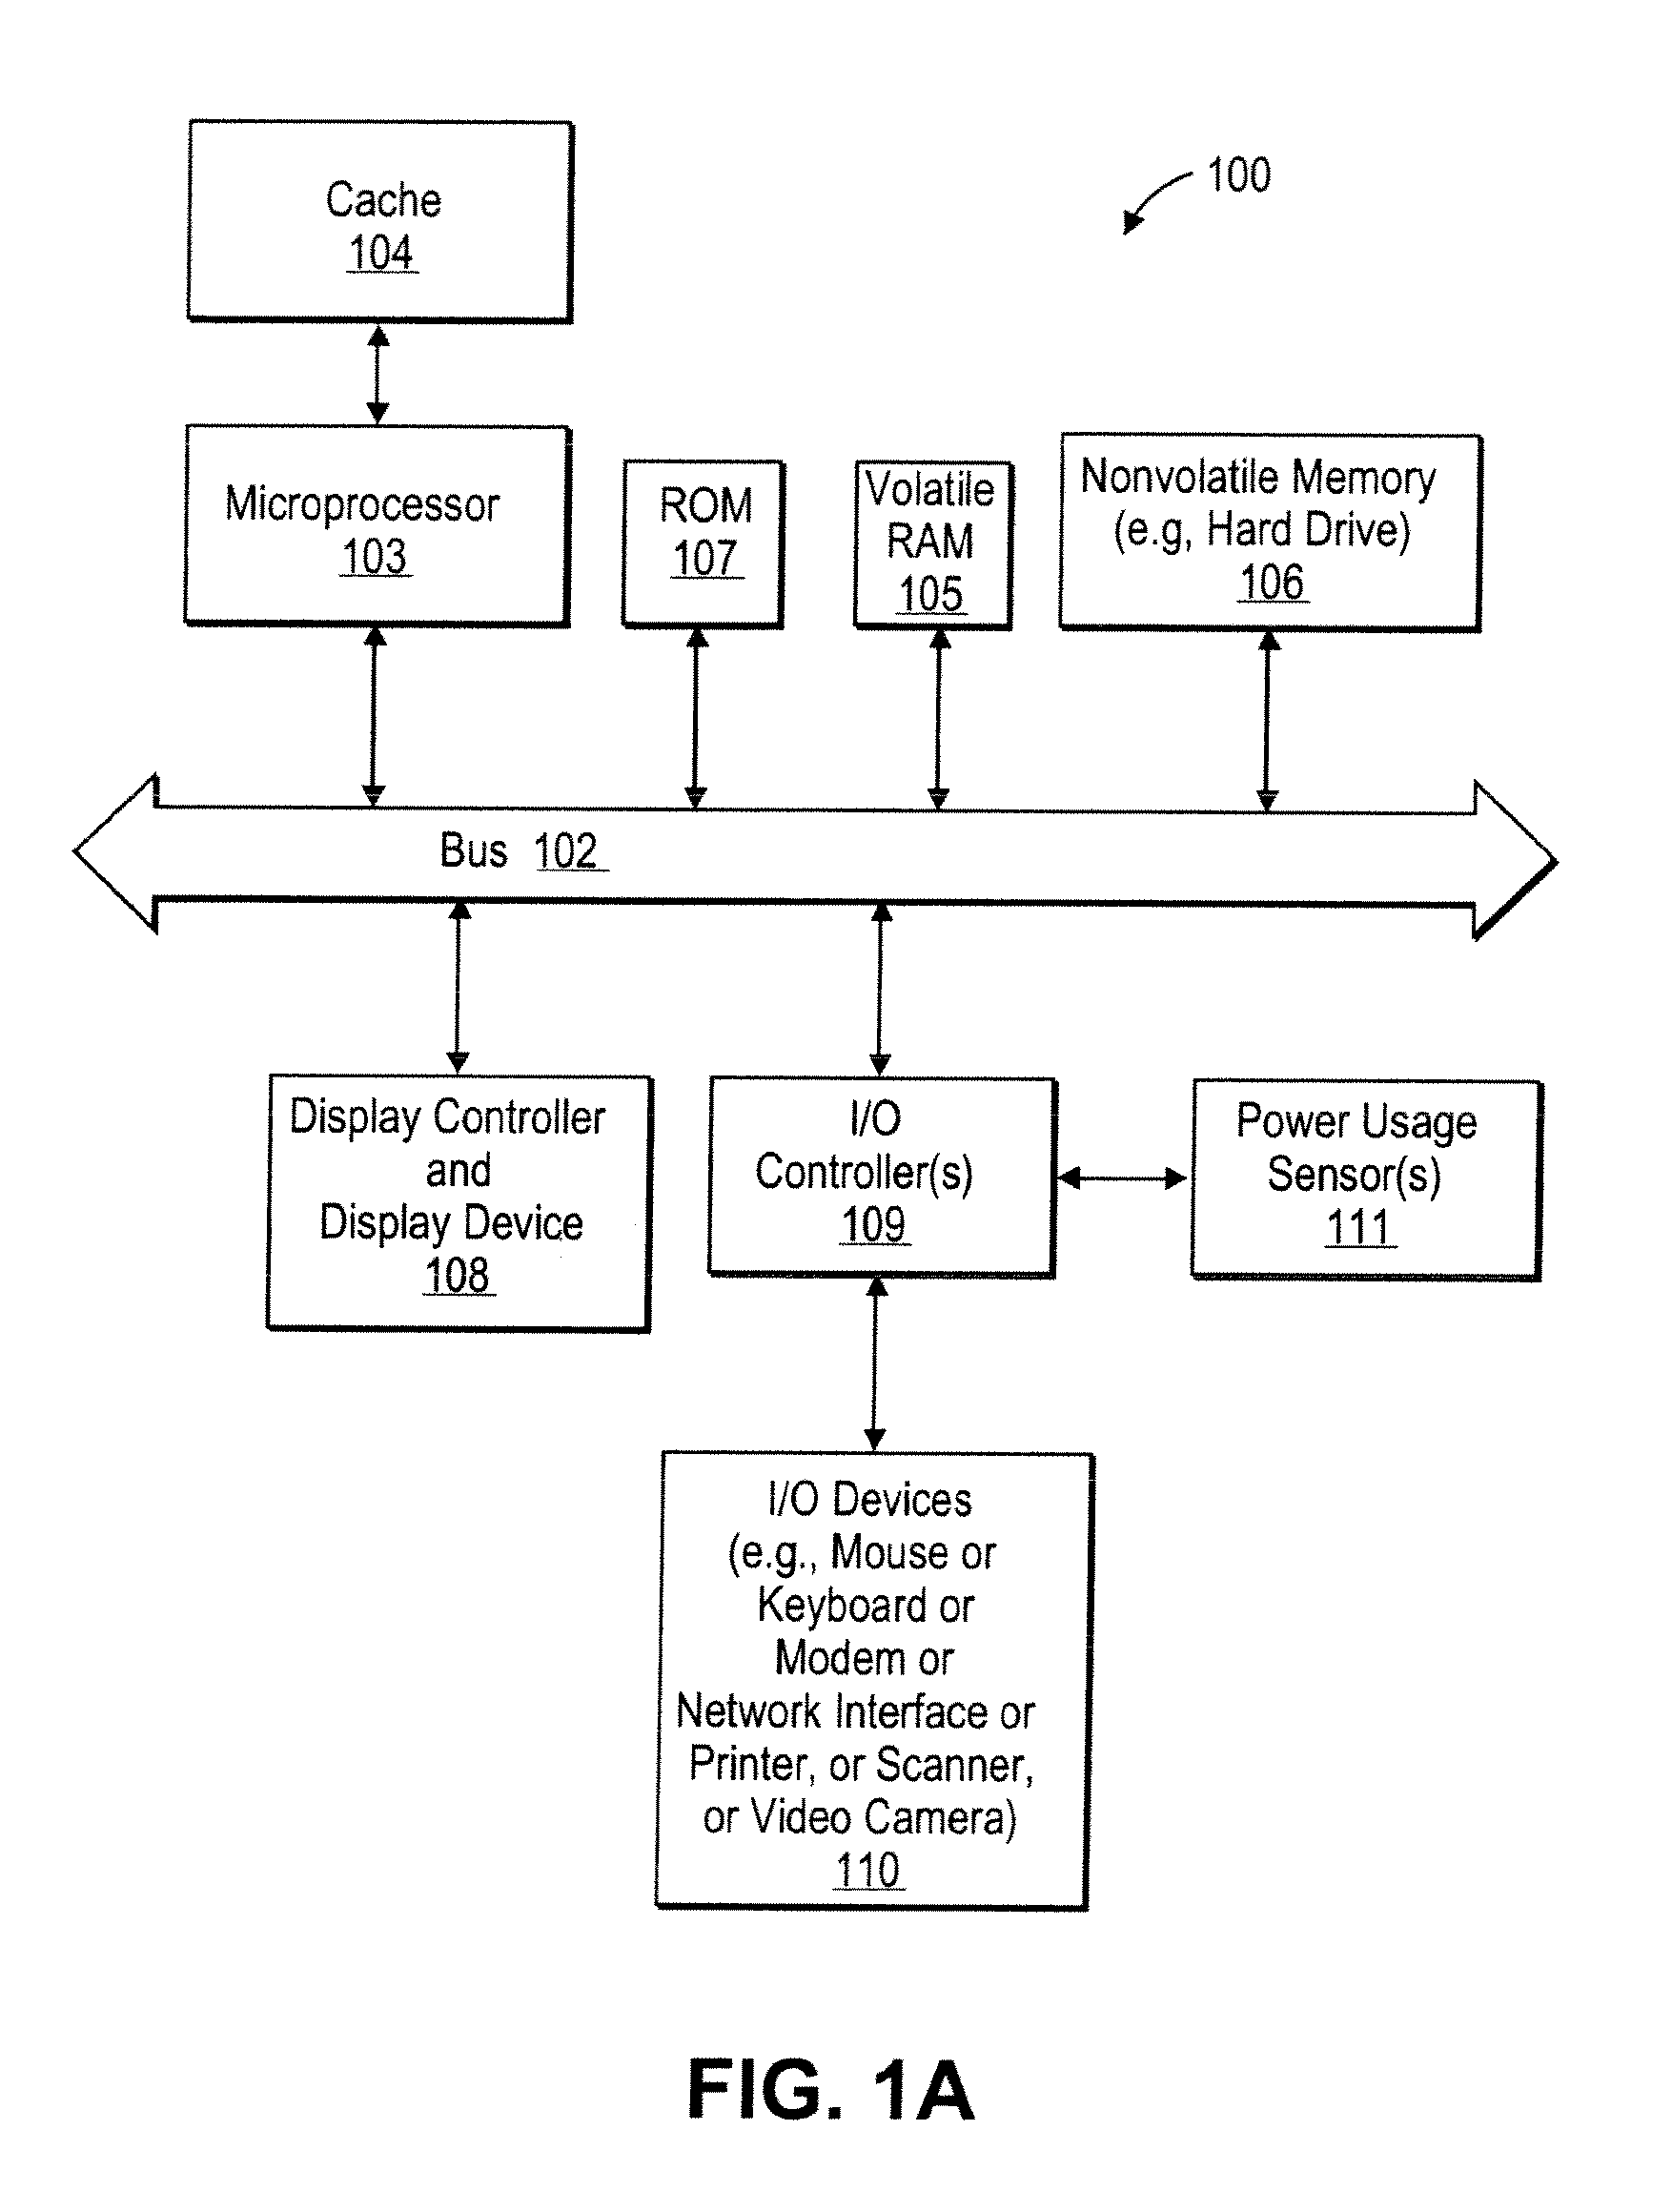 Forced idle of a data processing system